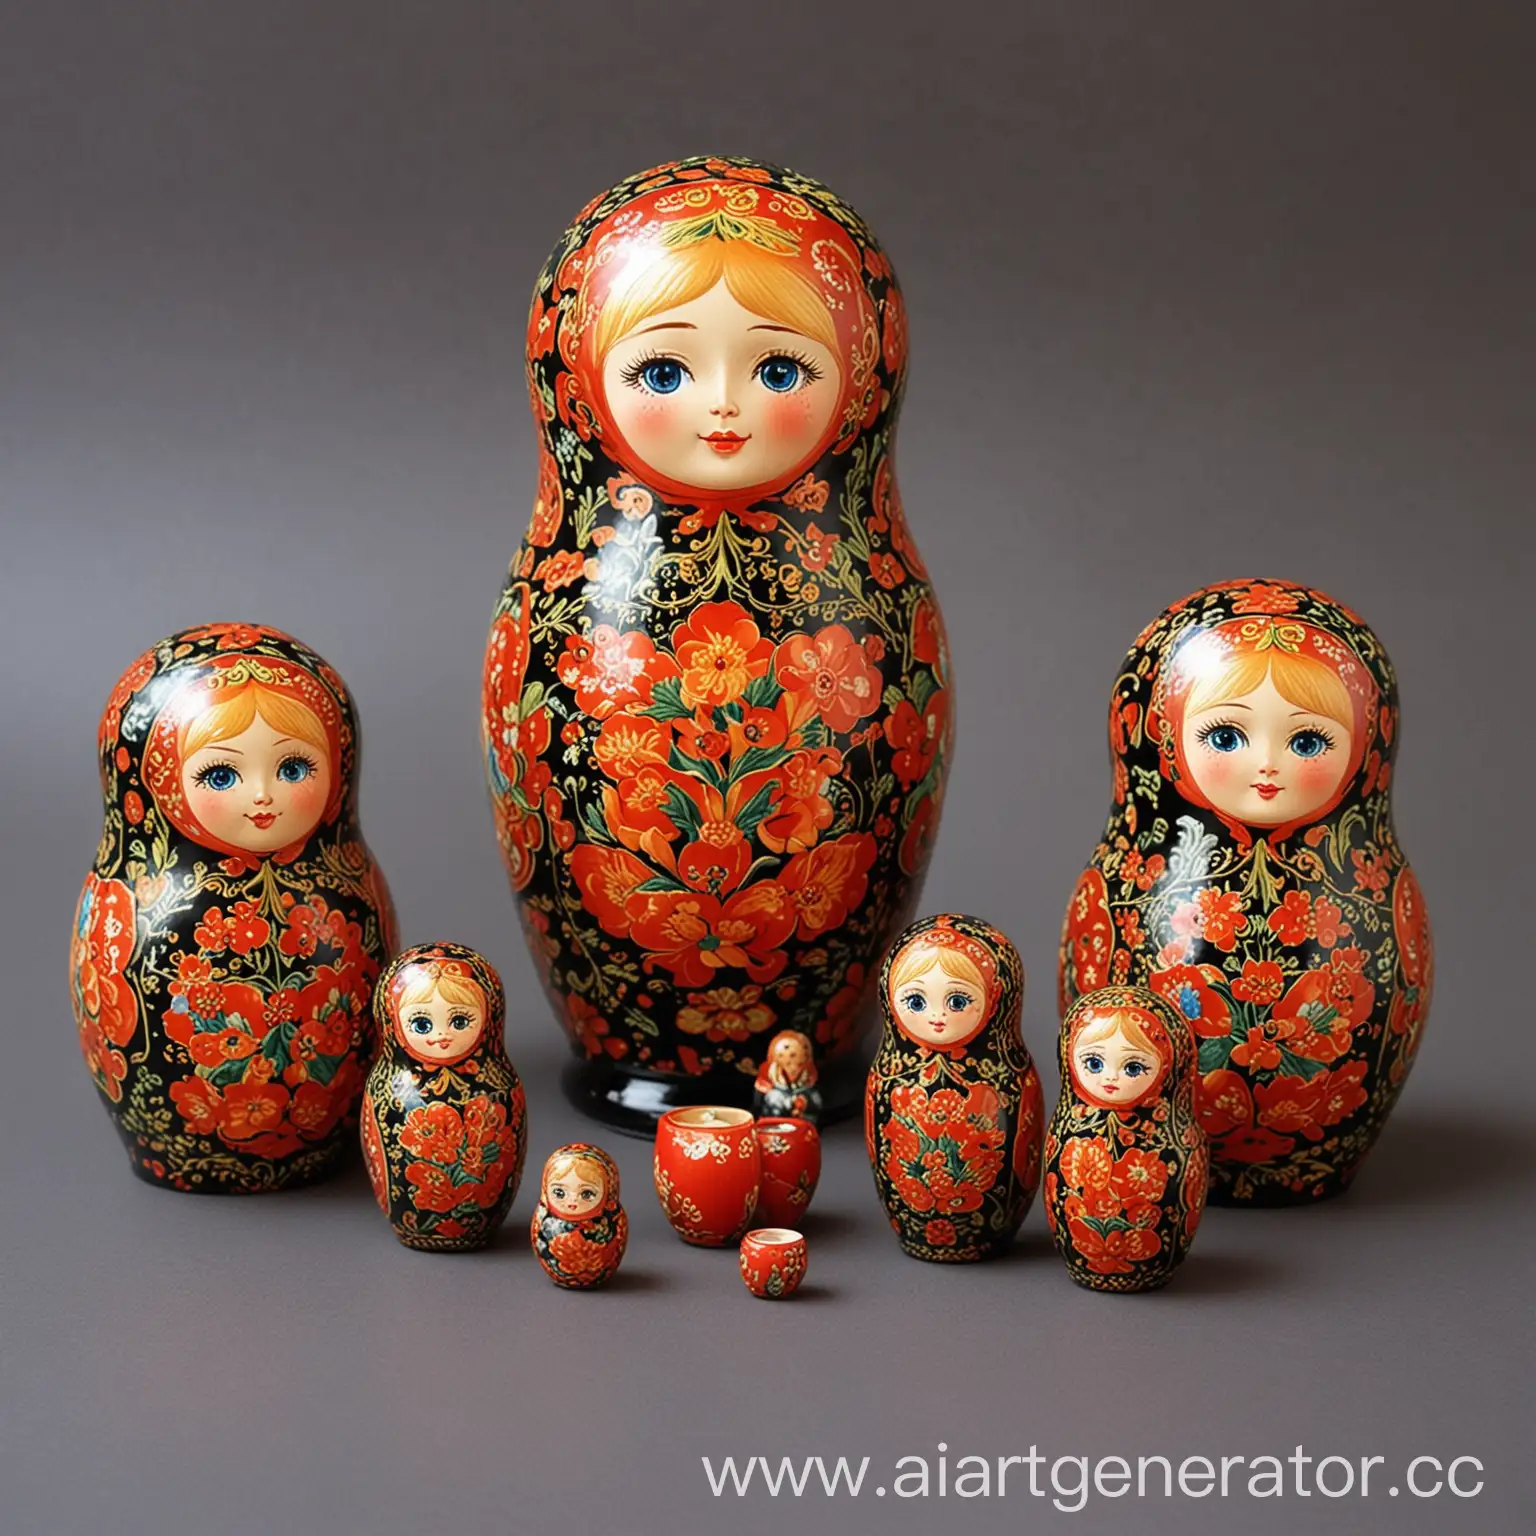 Khokhloma-Toys-Traditional-Russian-Wooden-Playthings